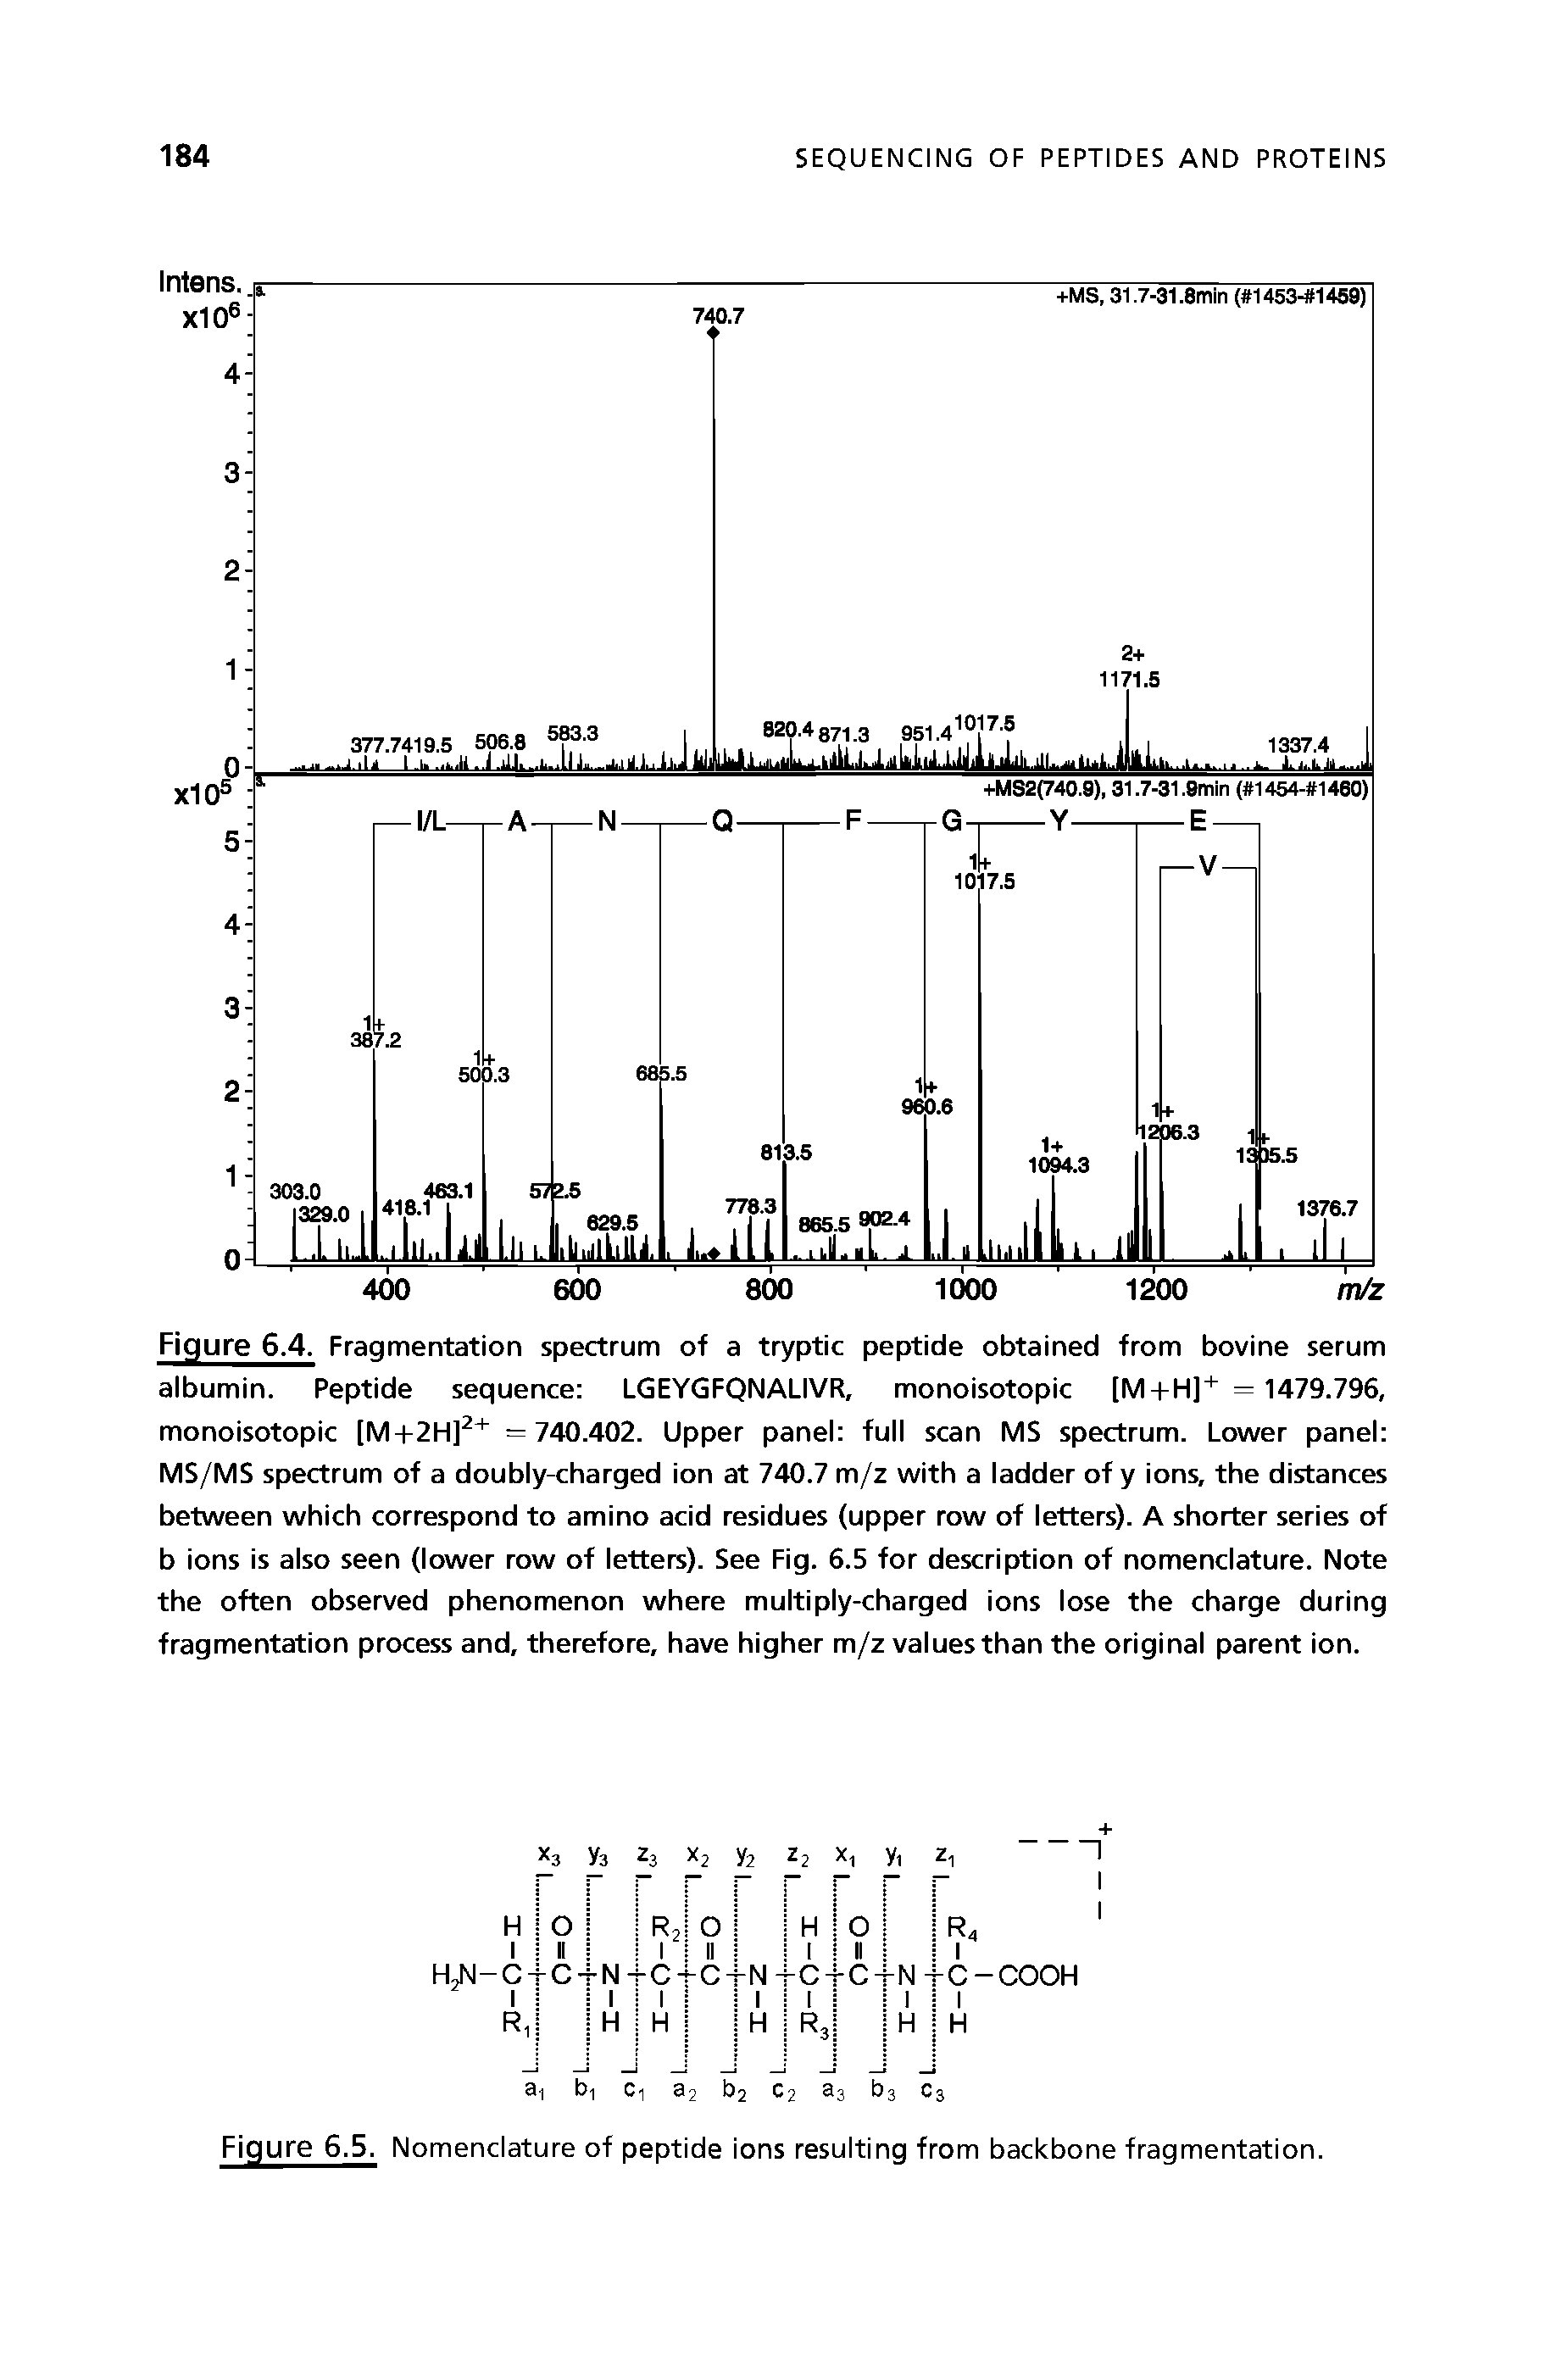 Figure 6.4. Fragmentation spectrum of a tryptic peptide obtained from bovine serum albumin. Peptide sequence LGEYGFQNALIVR, monoisotopic [M + H]+ = 1479.796, monoisotopic [M+2H]2+ =740.402. Upper panel full scan MS spectrum. Lower panel MS/MS spectrum of a doubly-charged ion at 740.7 m/z with a ladder of y ions, the distances between which correspond to amino acid residues (upper row of letters). A shorter series of b ions is also seen (lower row of letters). See Fig. 6.5 for description of nomenclature. Note the often observed phenomenon where multiply-charged ions lose the charge during fragmentation process and, therefore, have higher m/z values than the original parent ion.